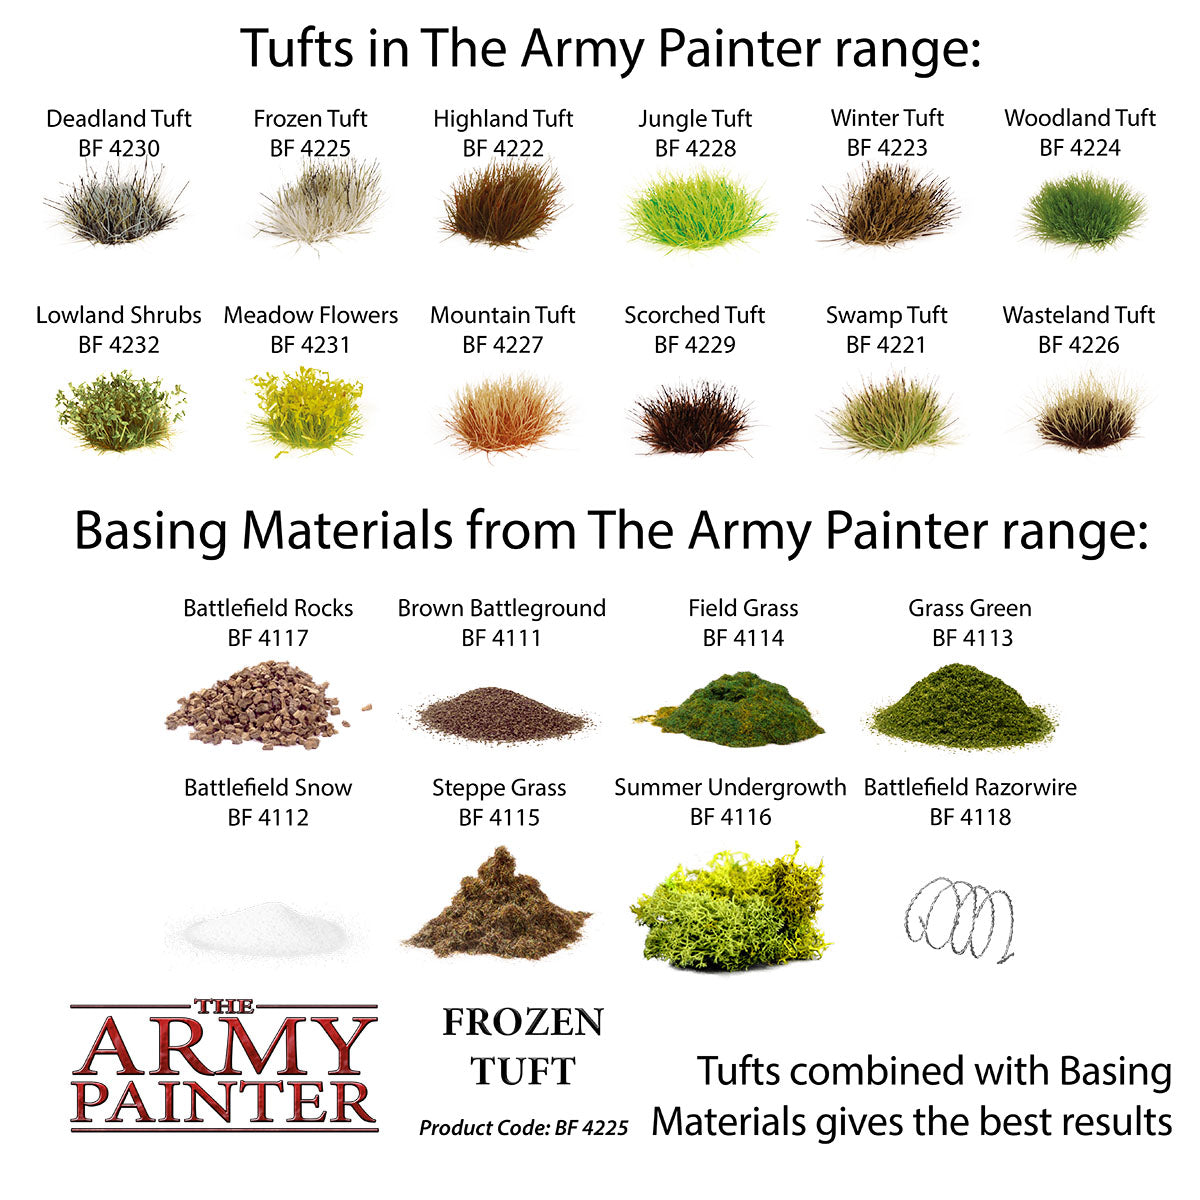 The Army Painter - Frozen Tuft BF4225